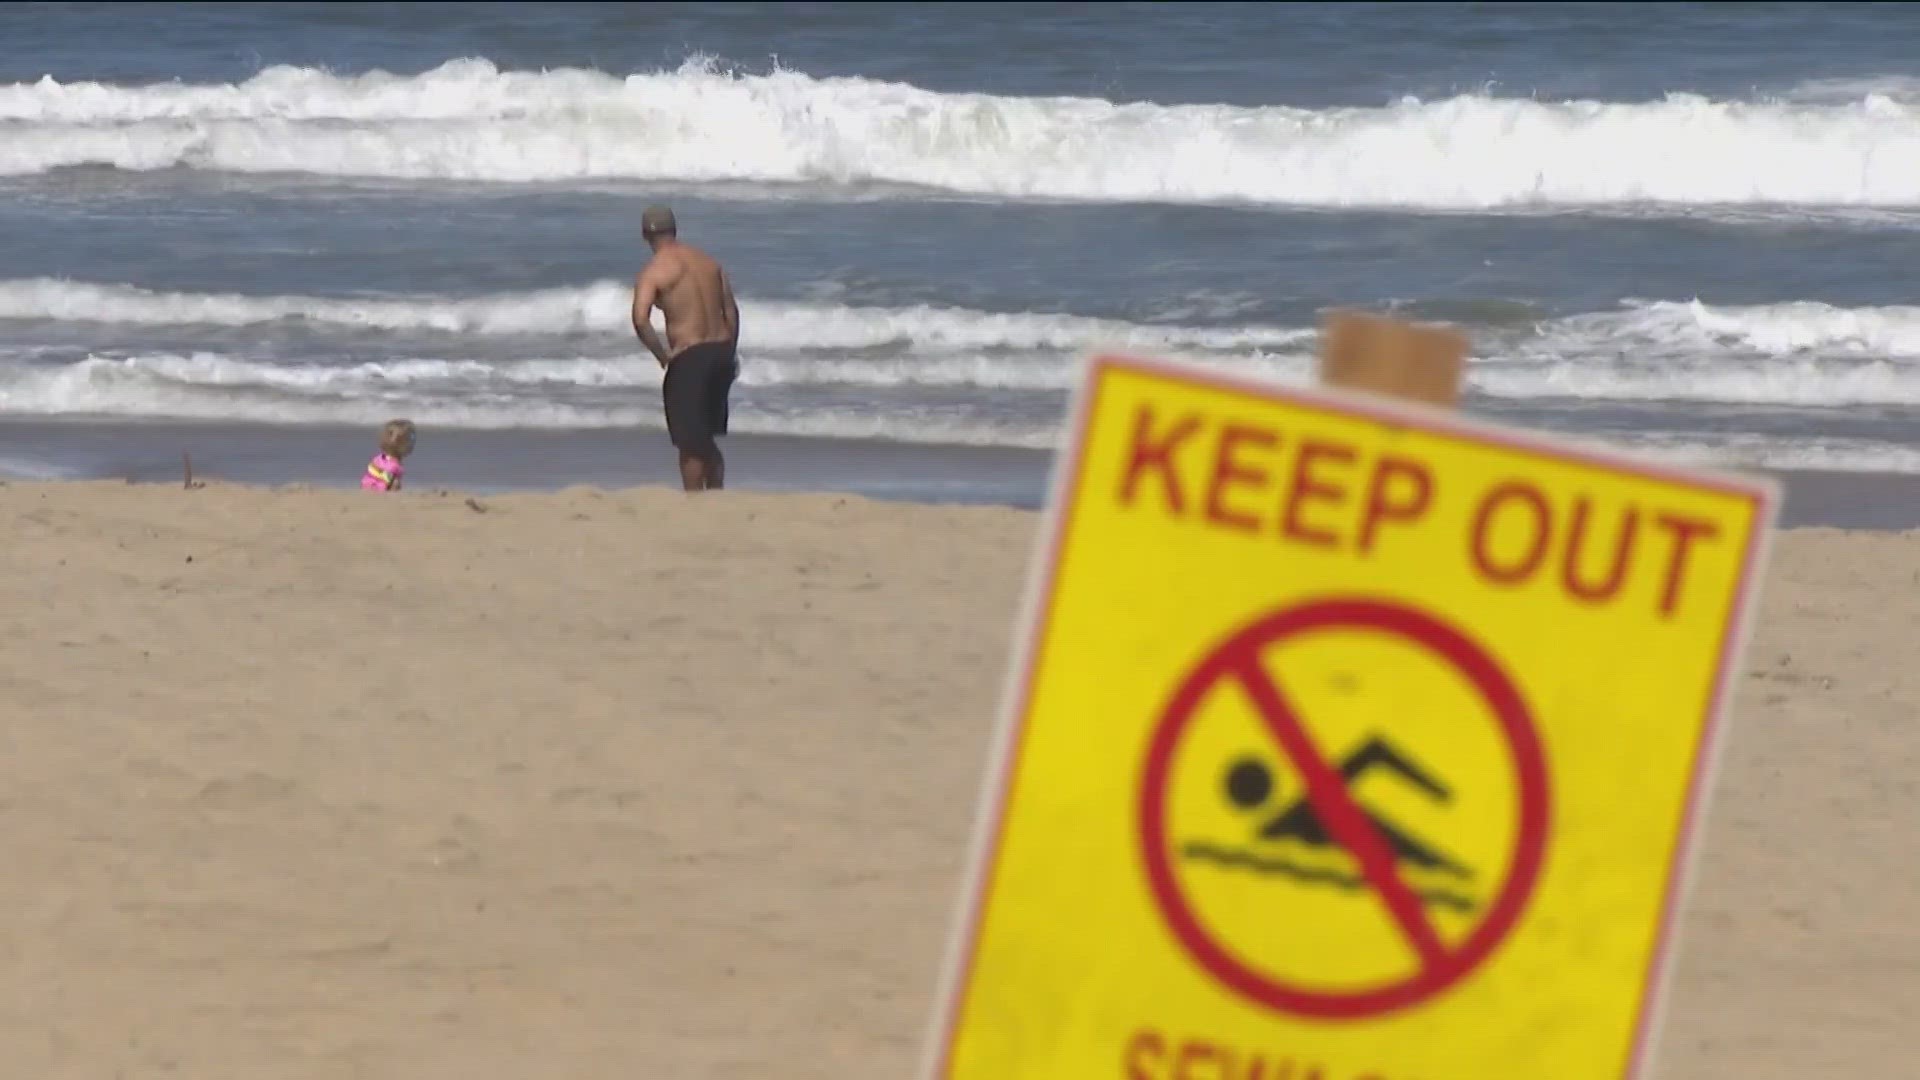 San Diego County has issued contact advisories or closed certain beaches due to sewage contamination.